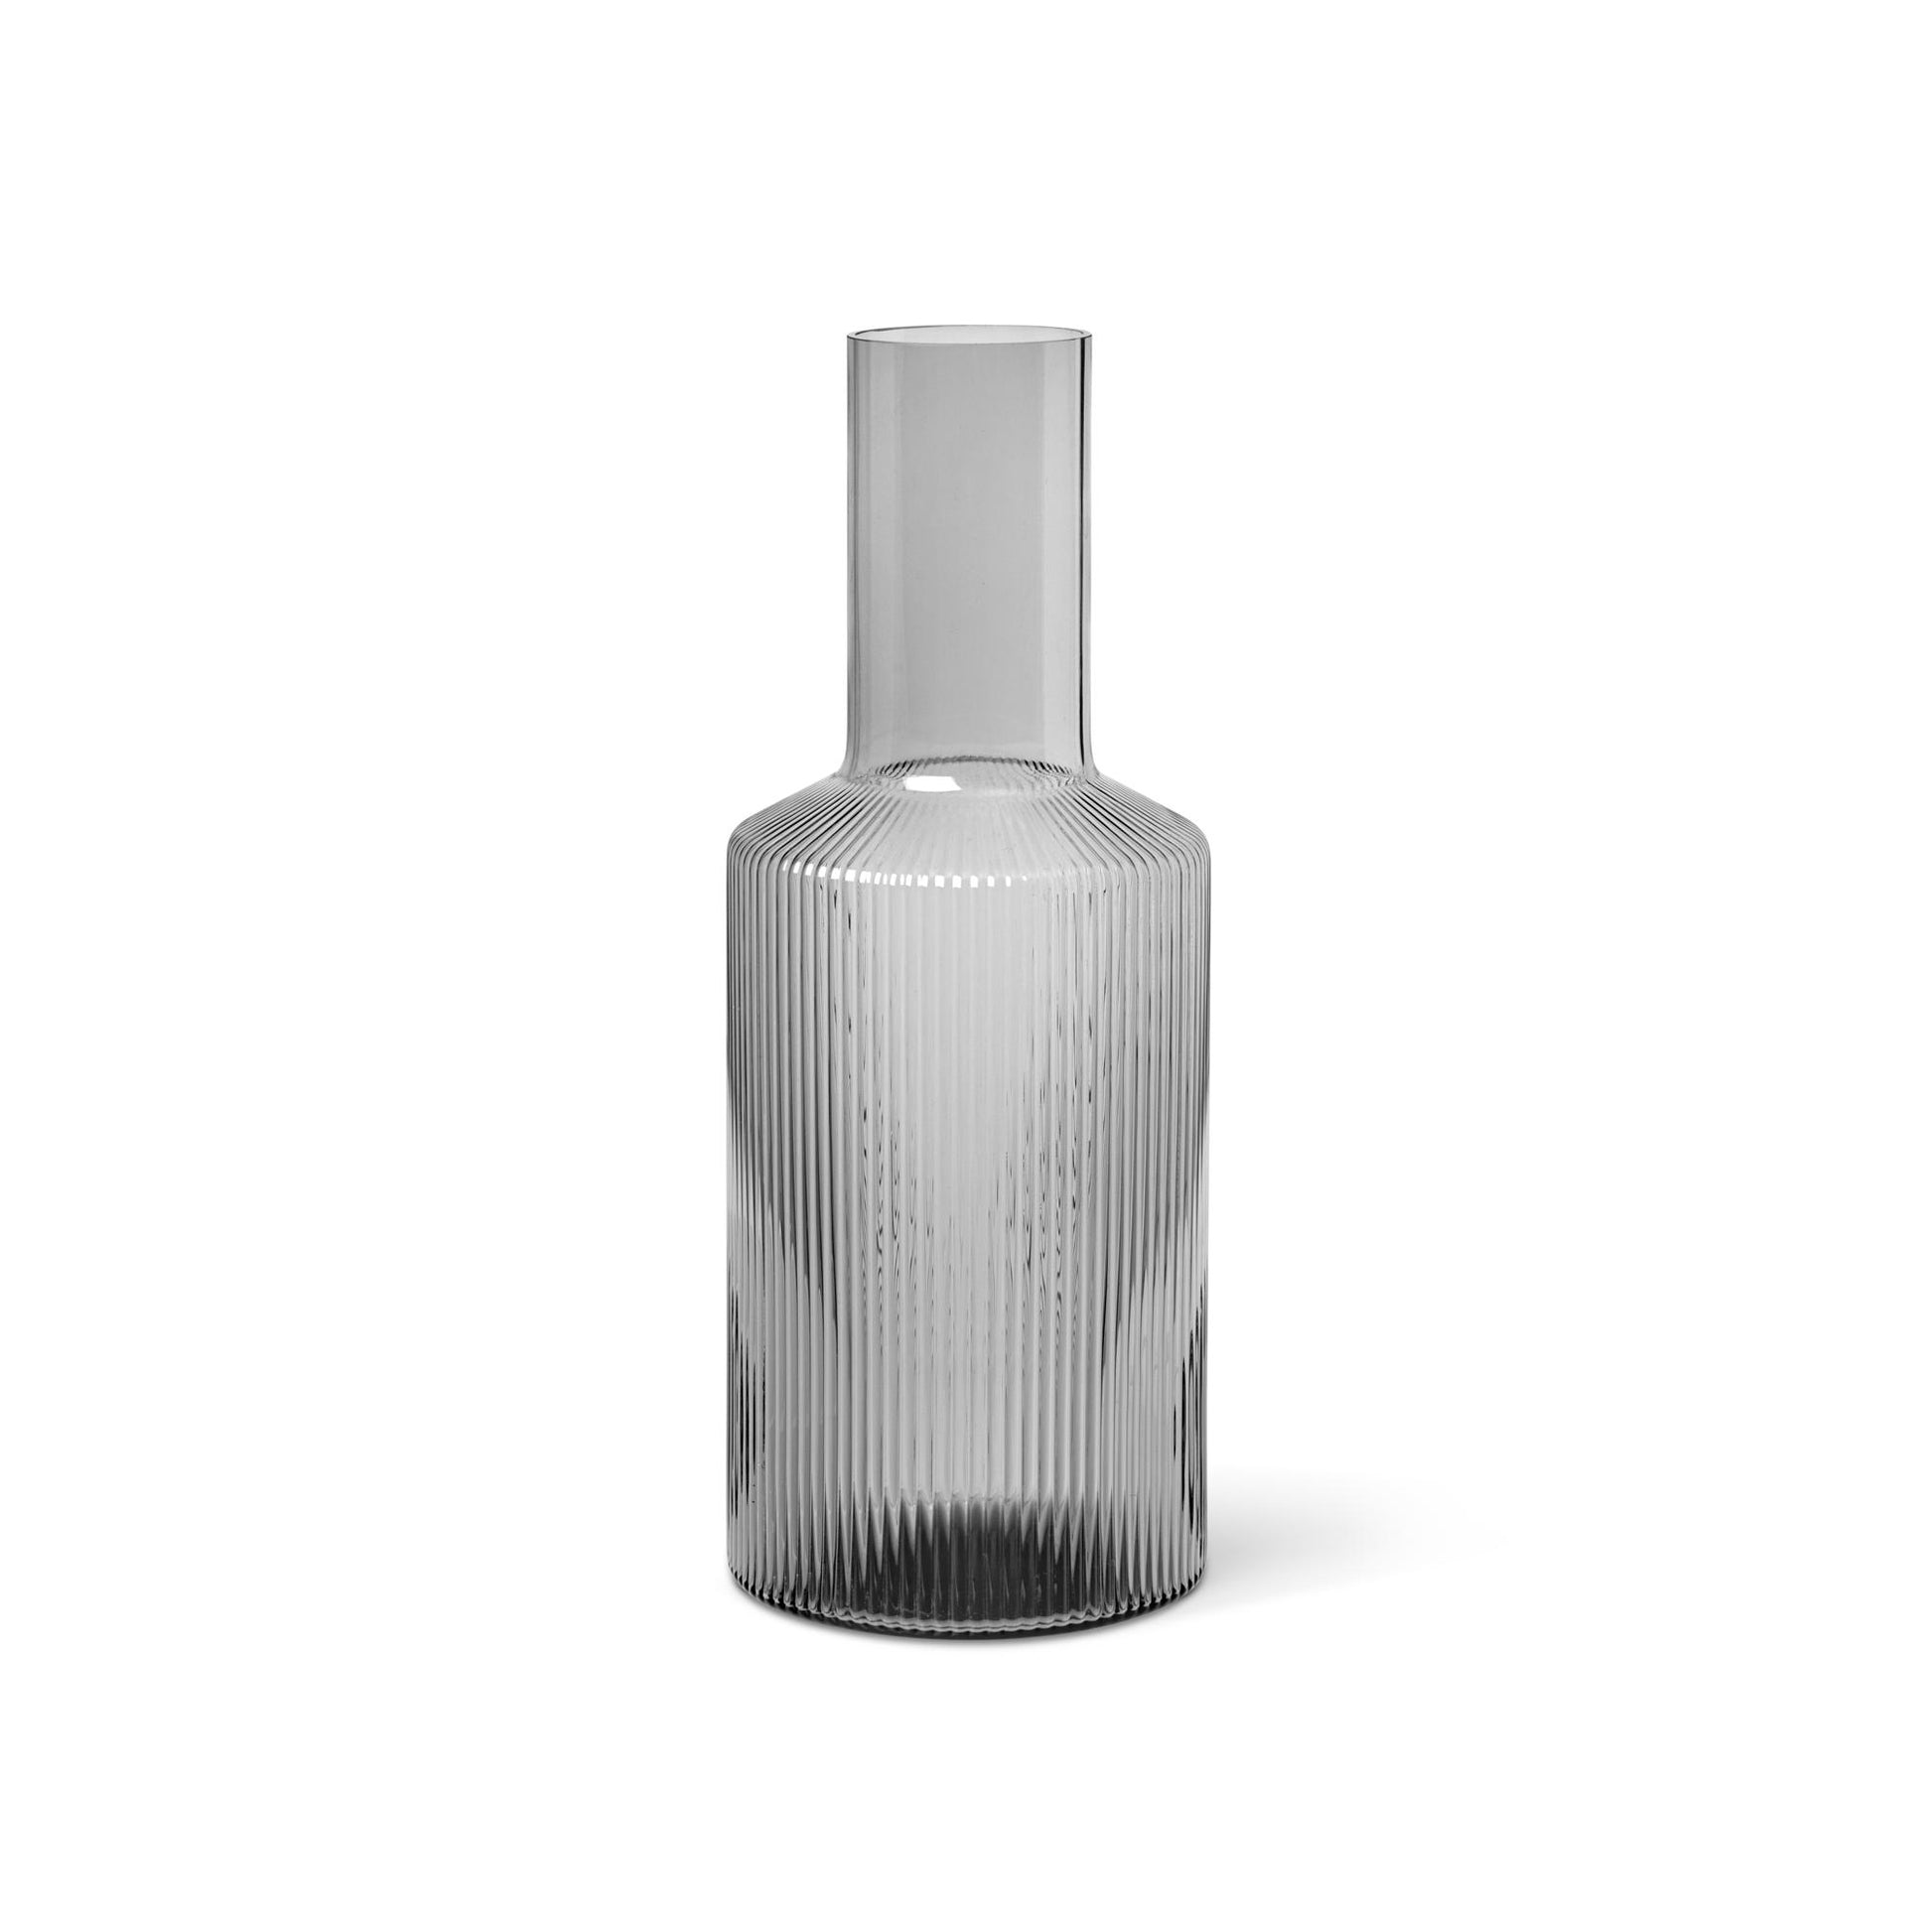 Ripple Carafe by Ferm Living #Smoked